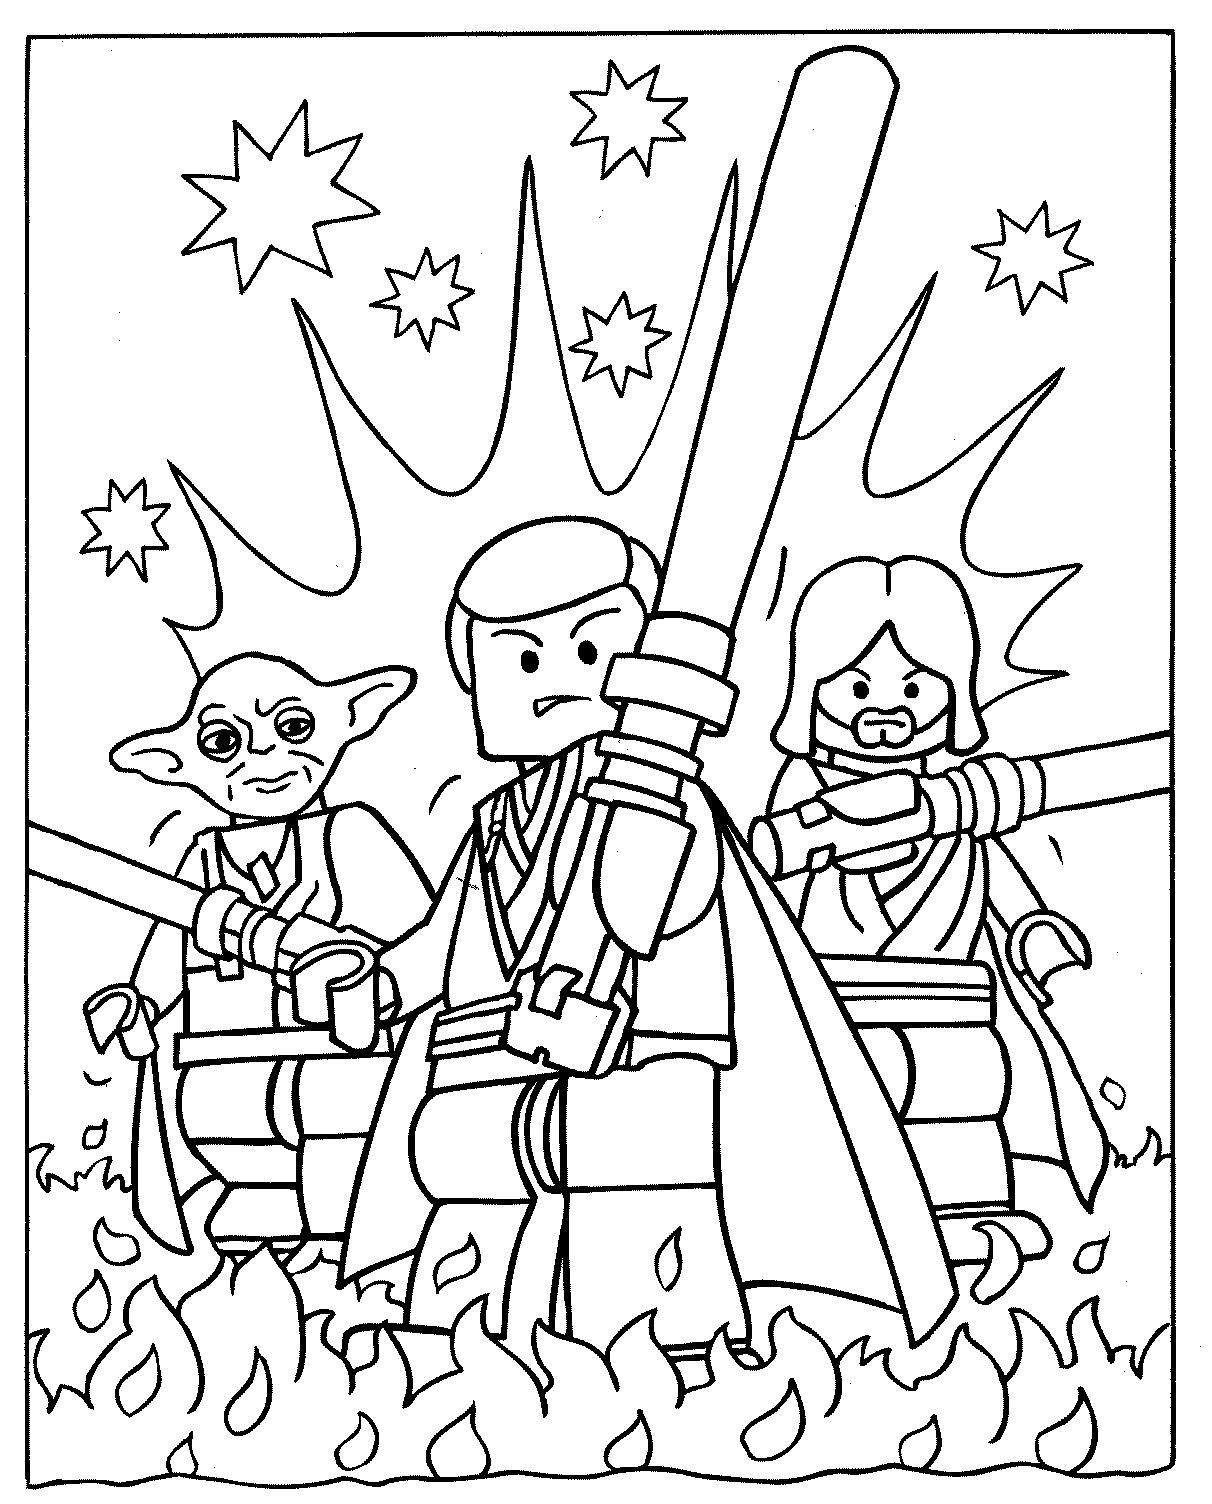 Lego Yoda Coloring Pages at GetColorings.com | Free printable colorings